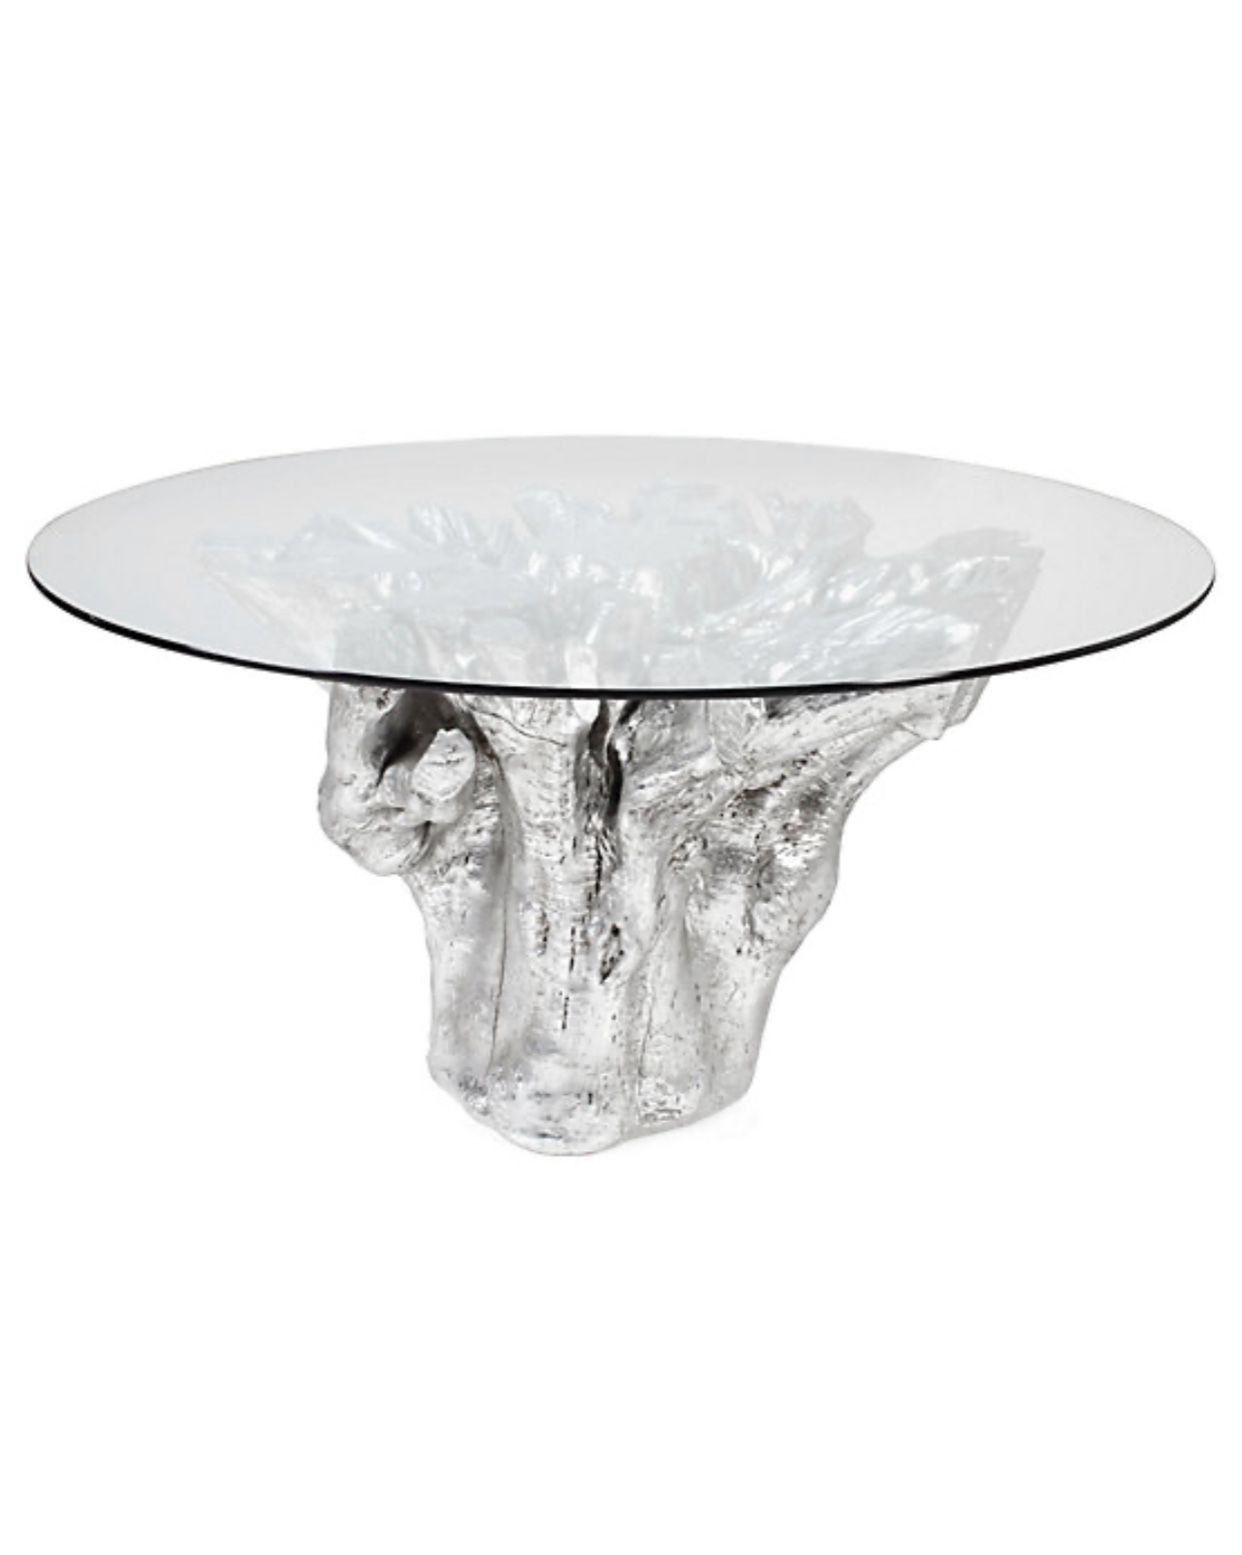 Z Gallerie “sequoia” round dining table